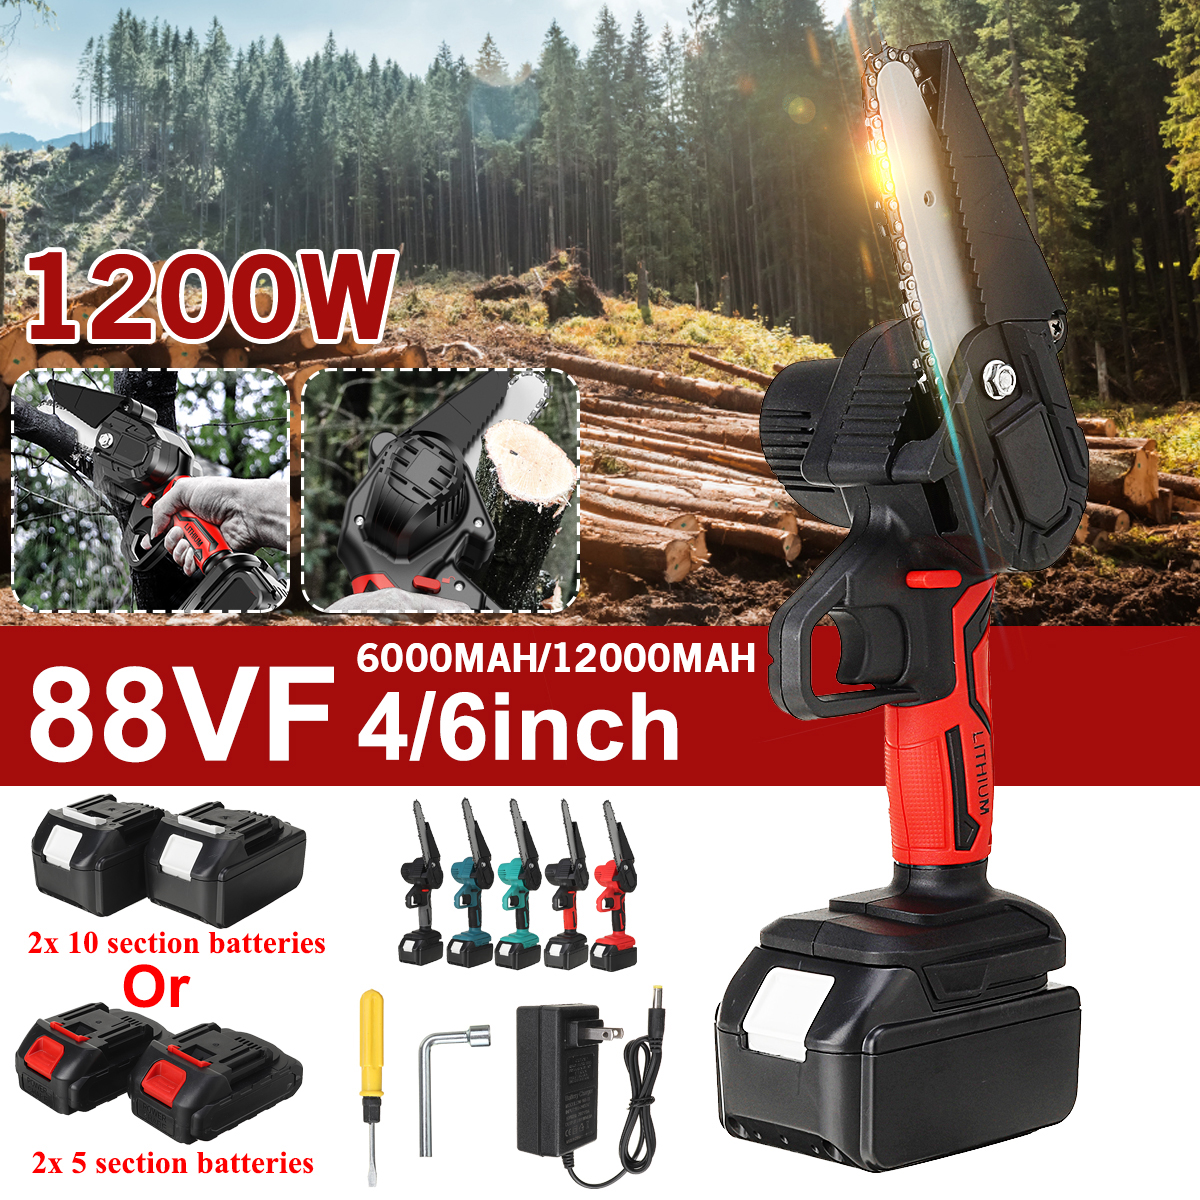 21V-46-Inch-Cordless-Electric-Chain-Saw-One-Hand-Saw-Mini-Portable-Woodworking-Wood-Cutter-W-2pcs-Ba-1880984-3